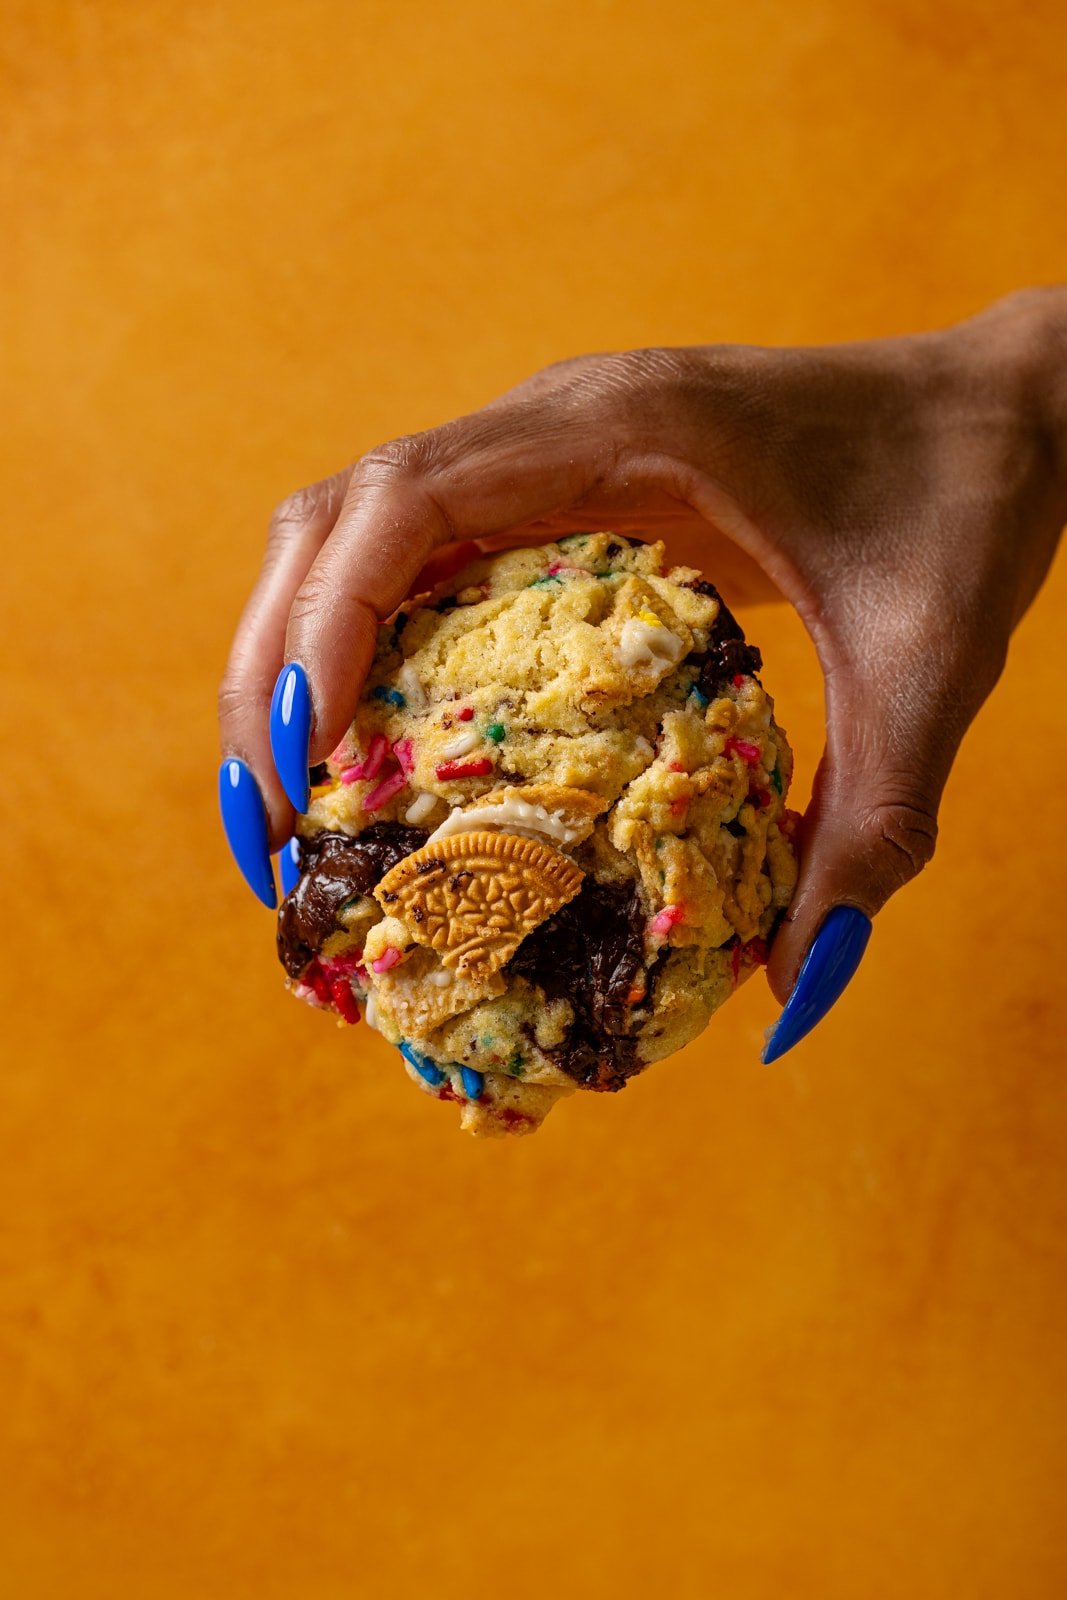 Cookie being held with hand in front of an orange background.